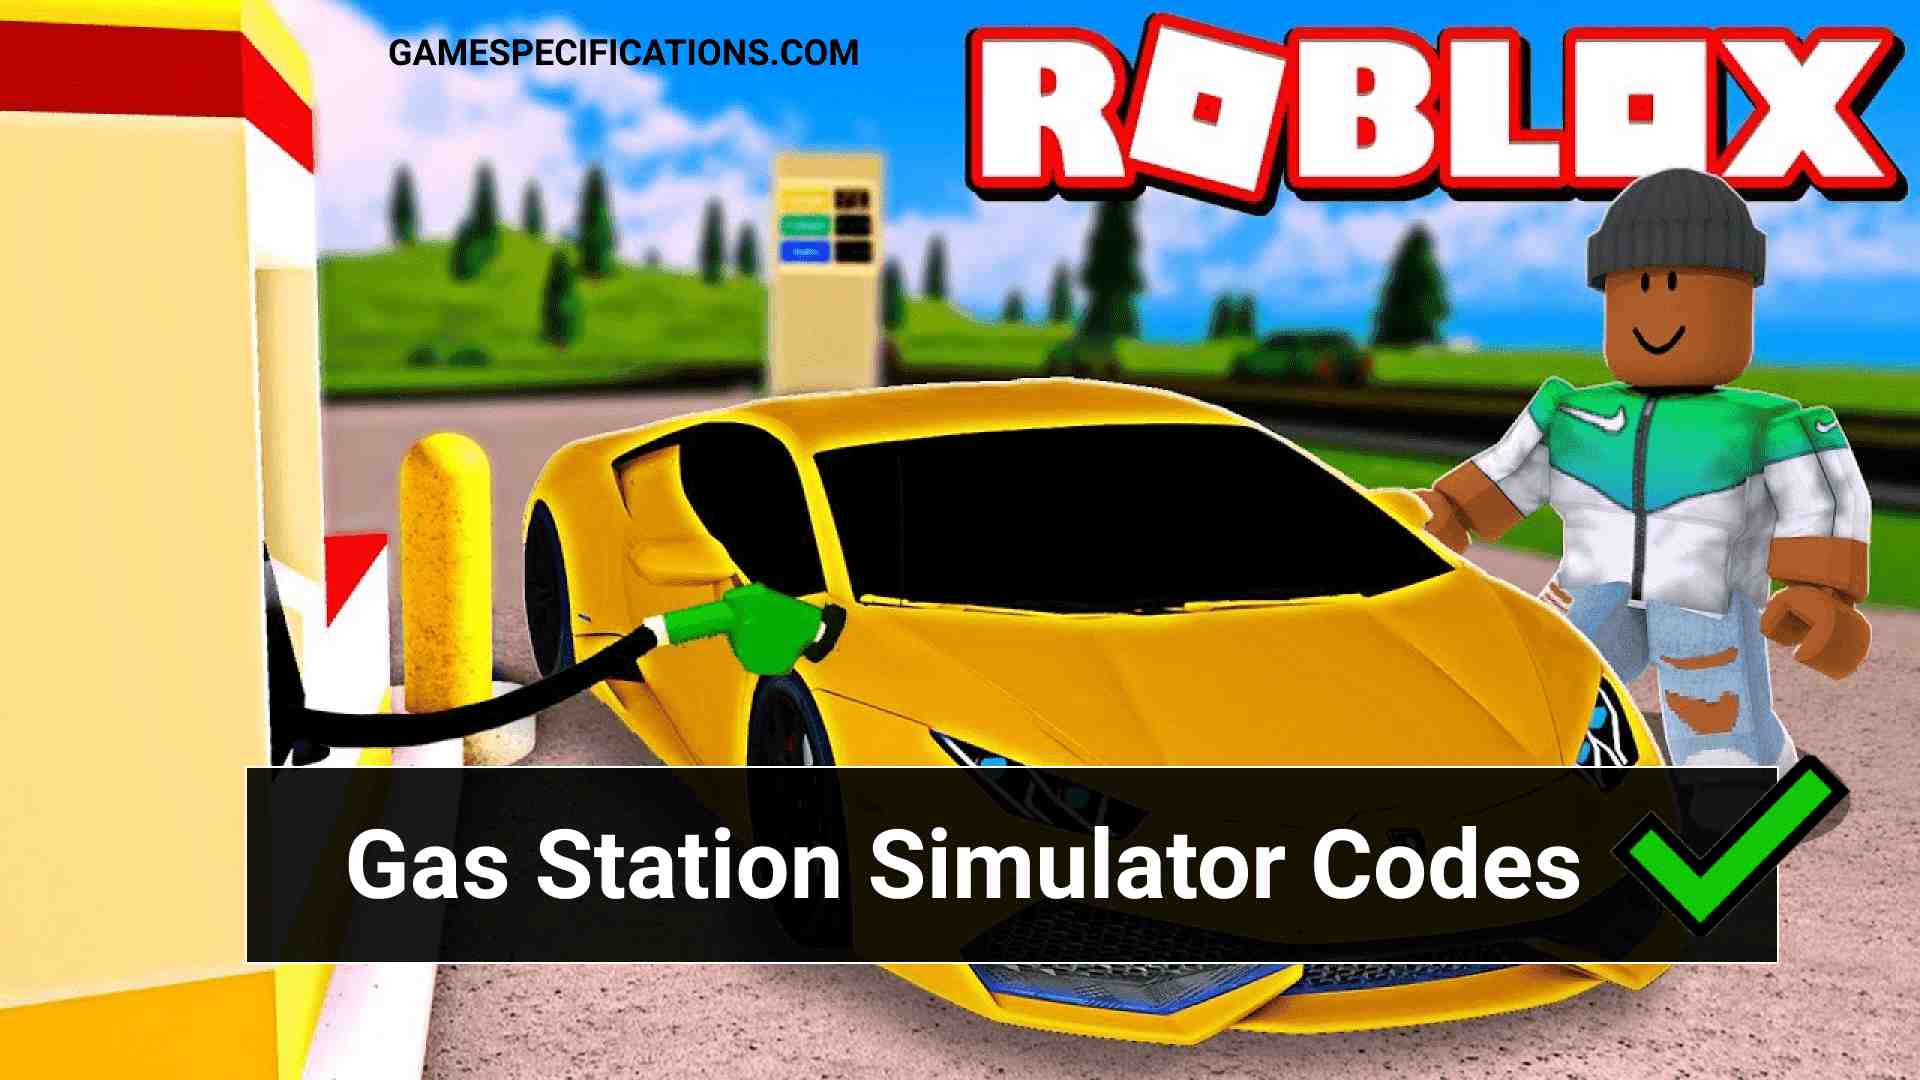 Roblox Gas Station Simulator Codes July 2021 Game Specifications - roblox bloxburg gas station